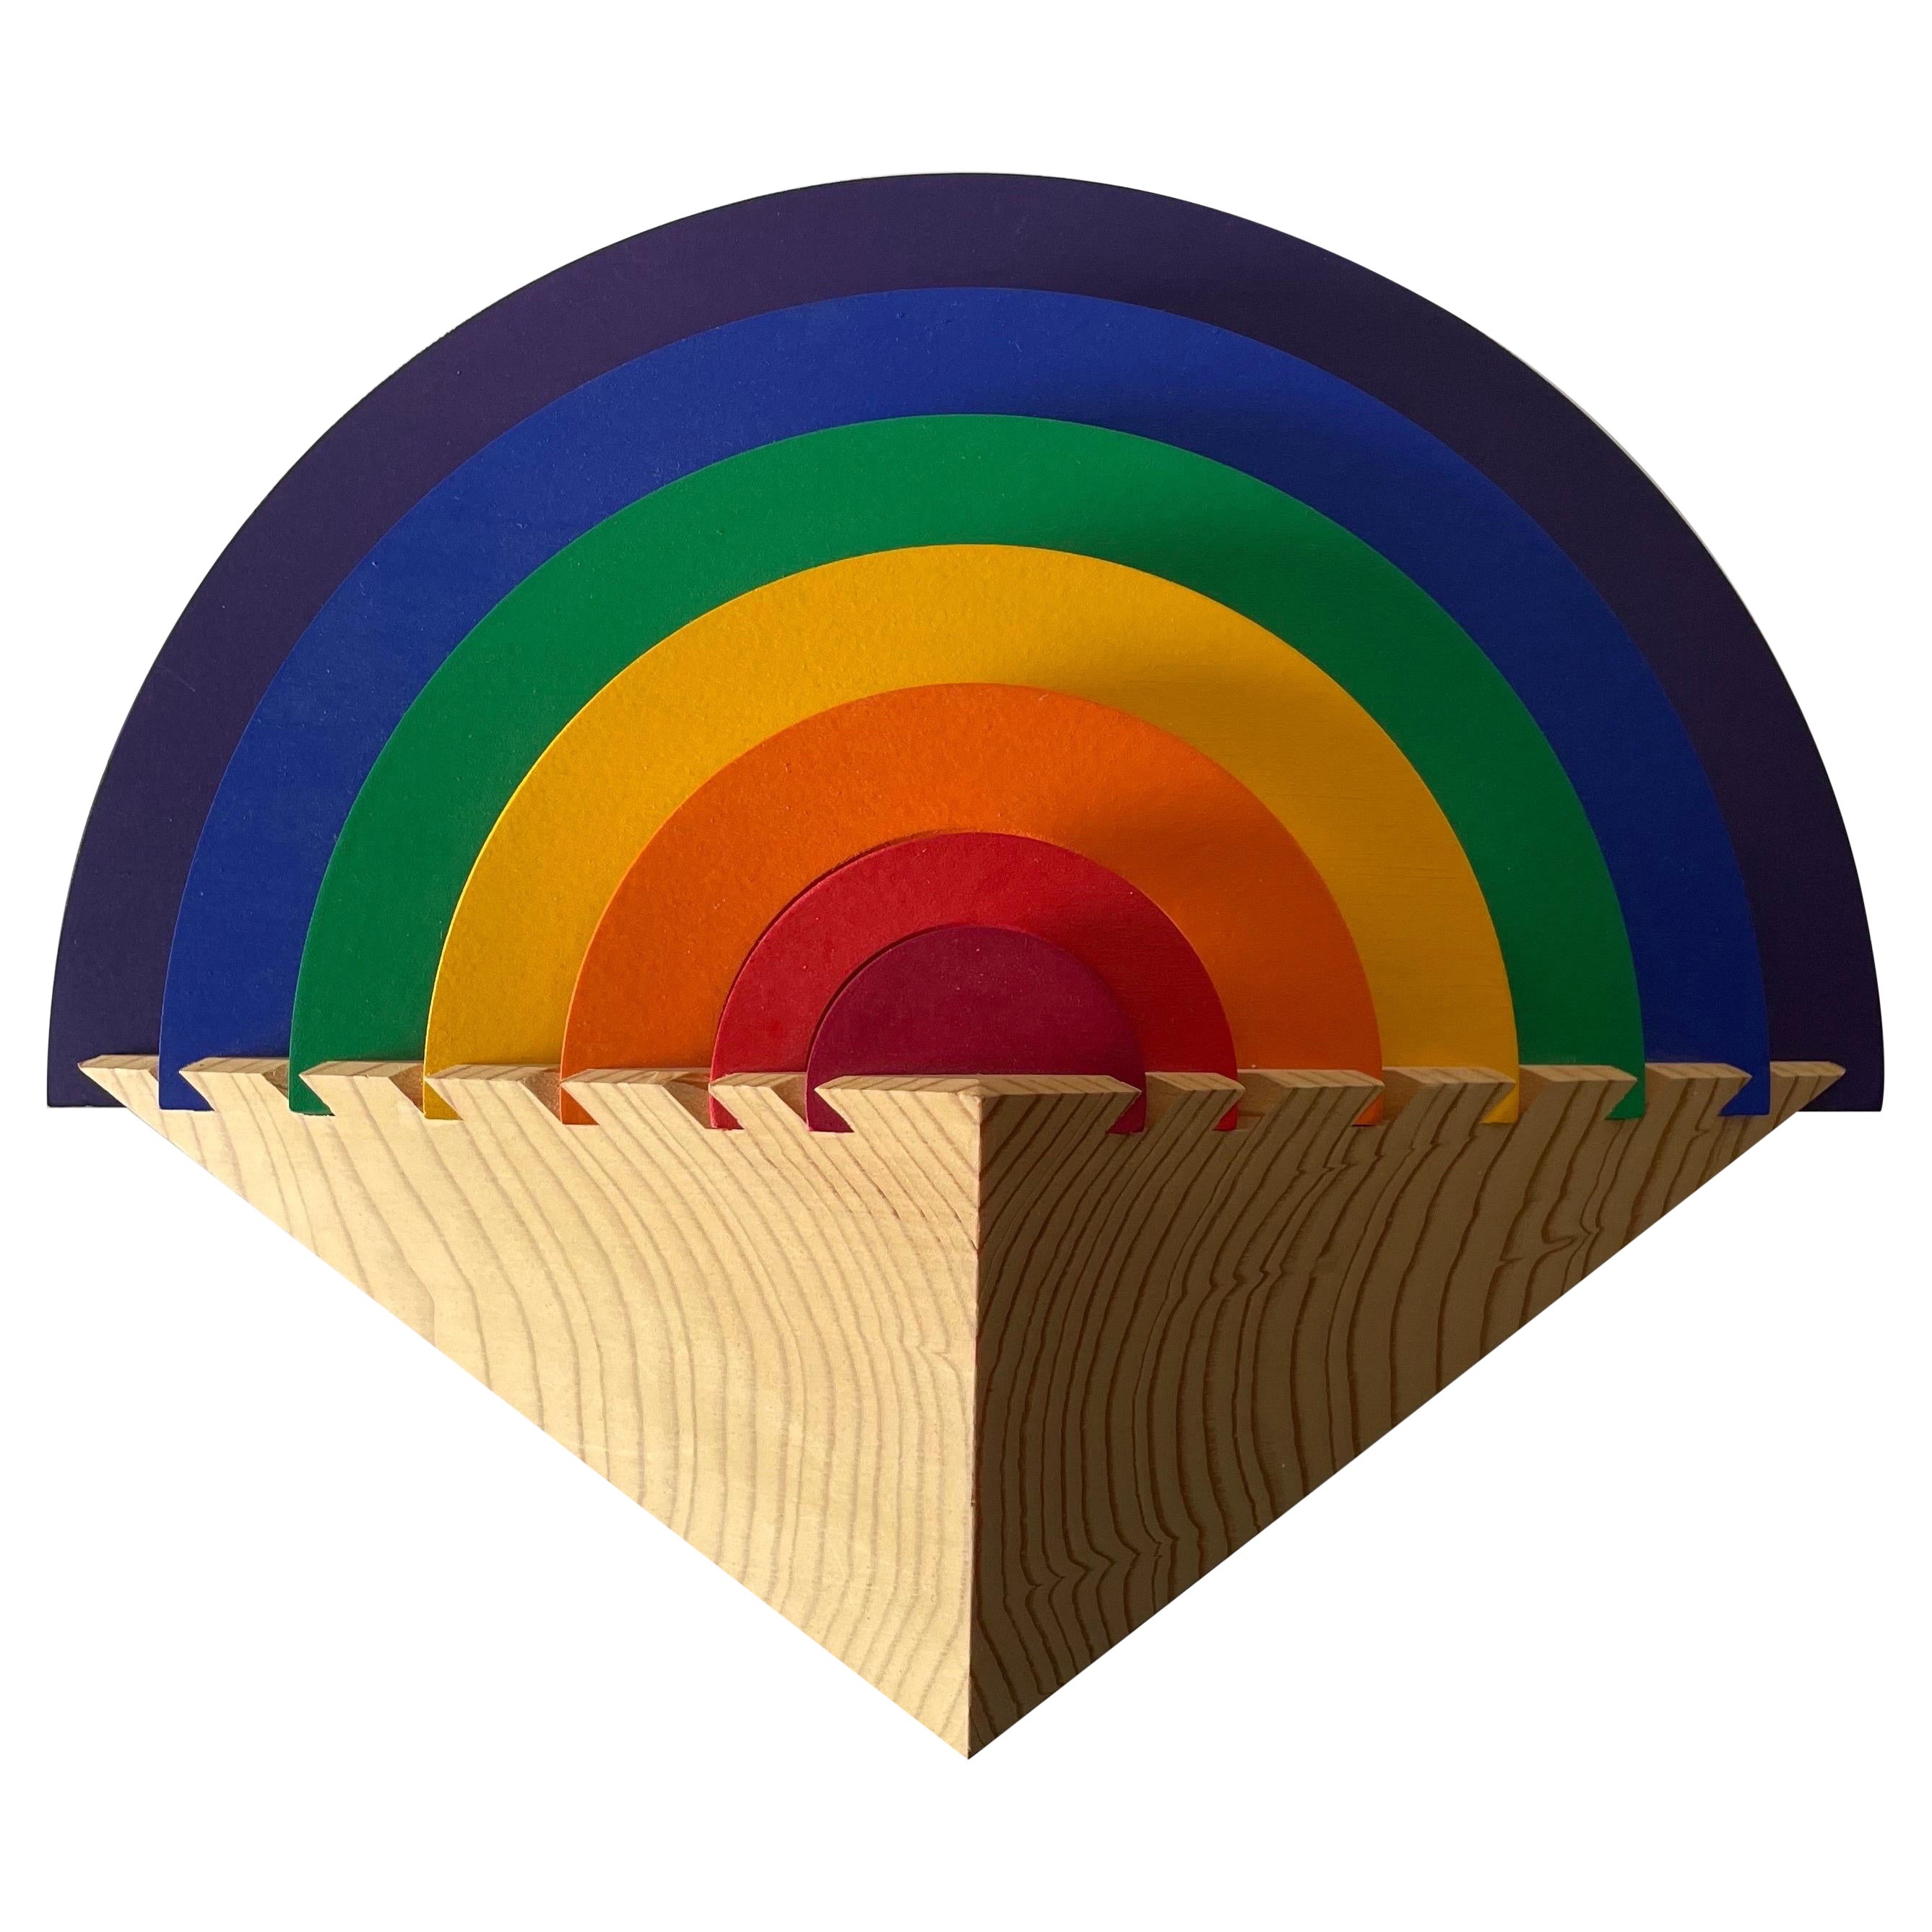 Rainbow design Wood Night Lamp by Kiener Zürich, in Style of Memphis Group, 1980 For Sale